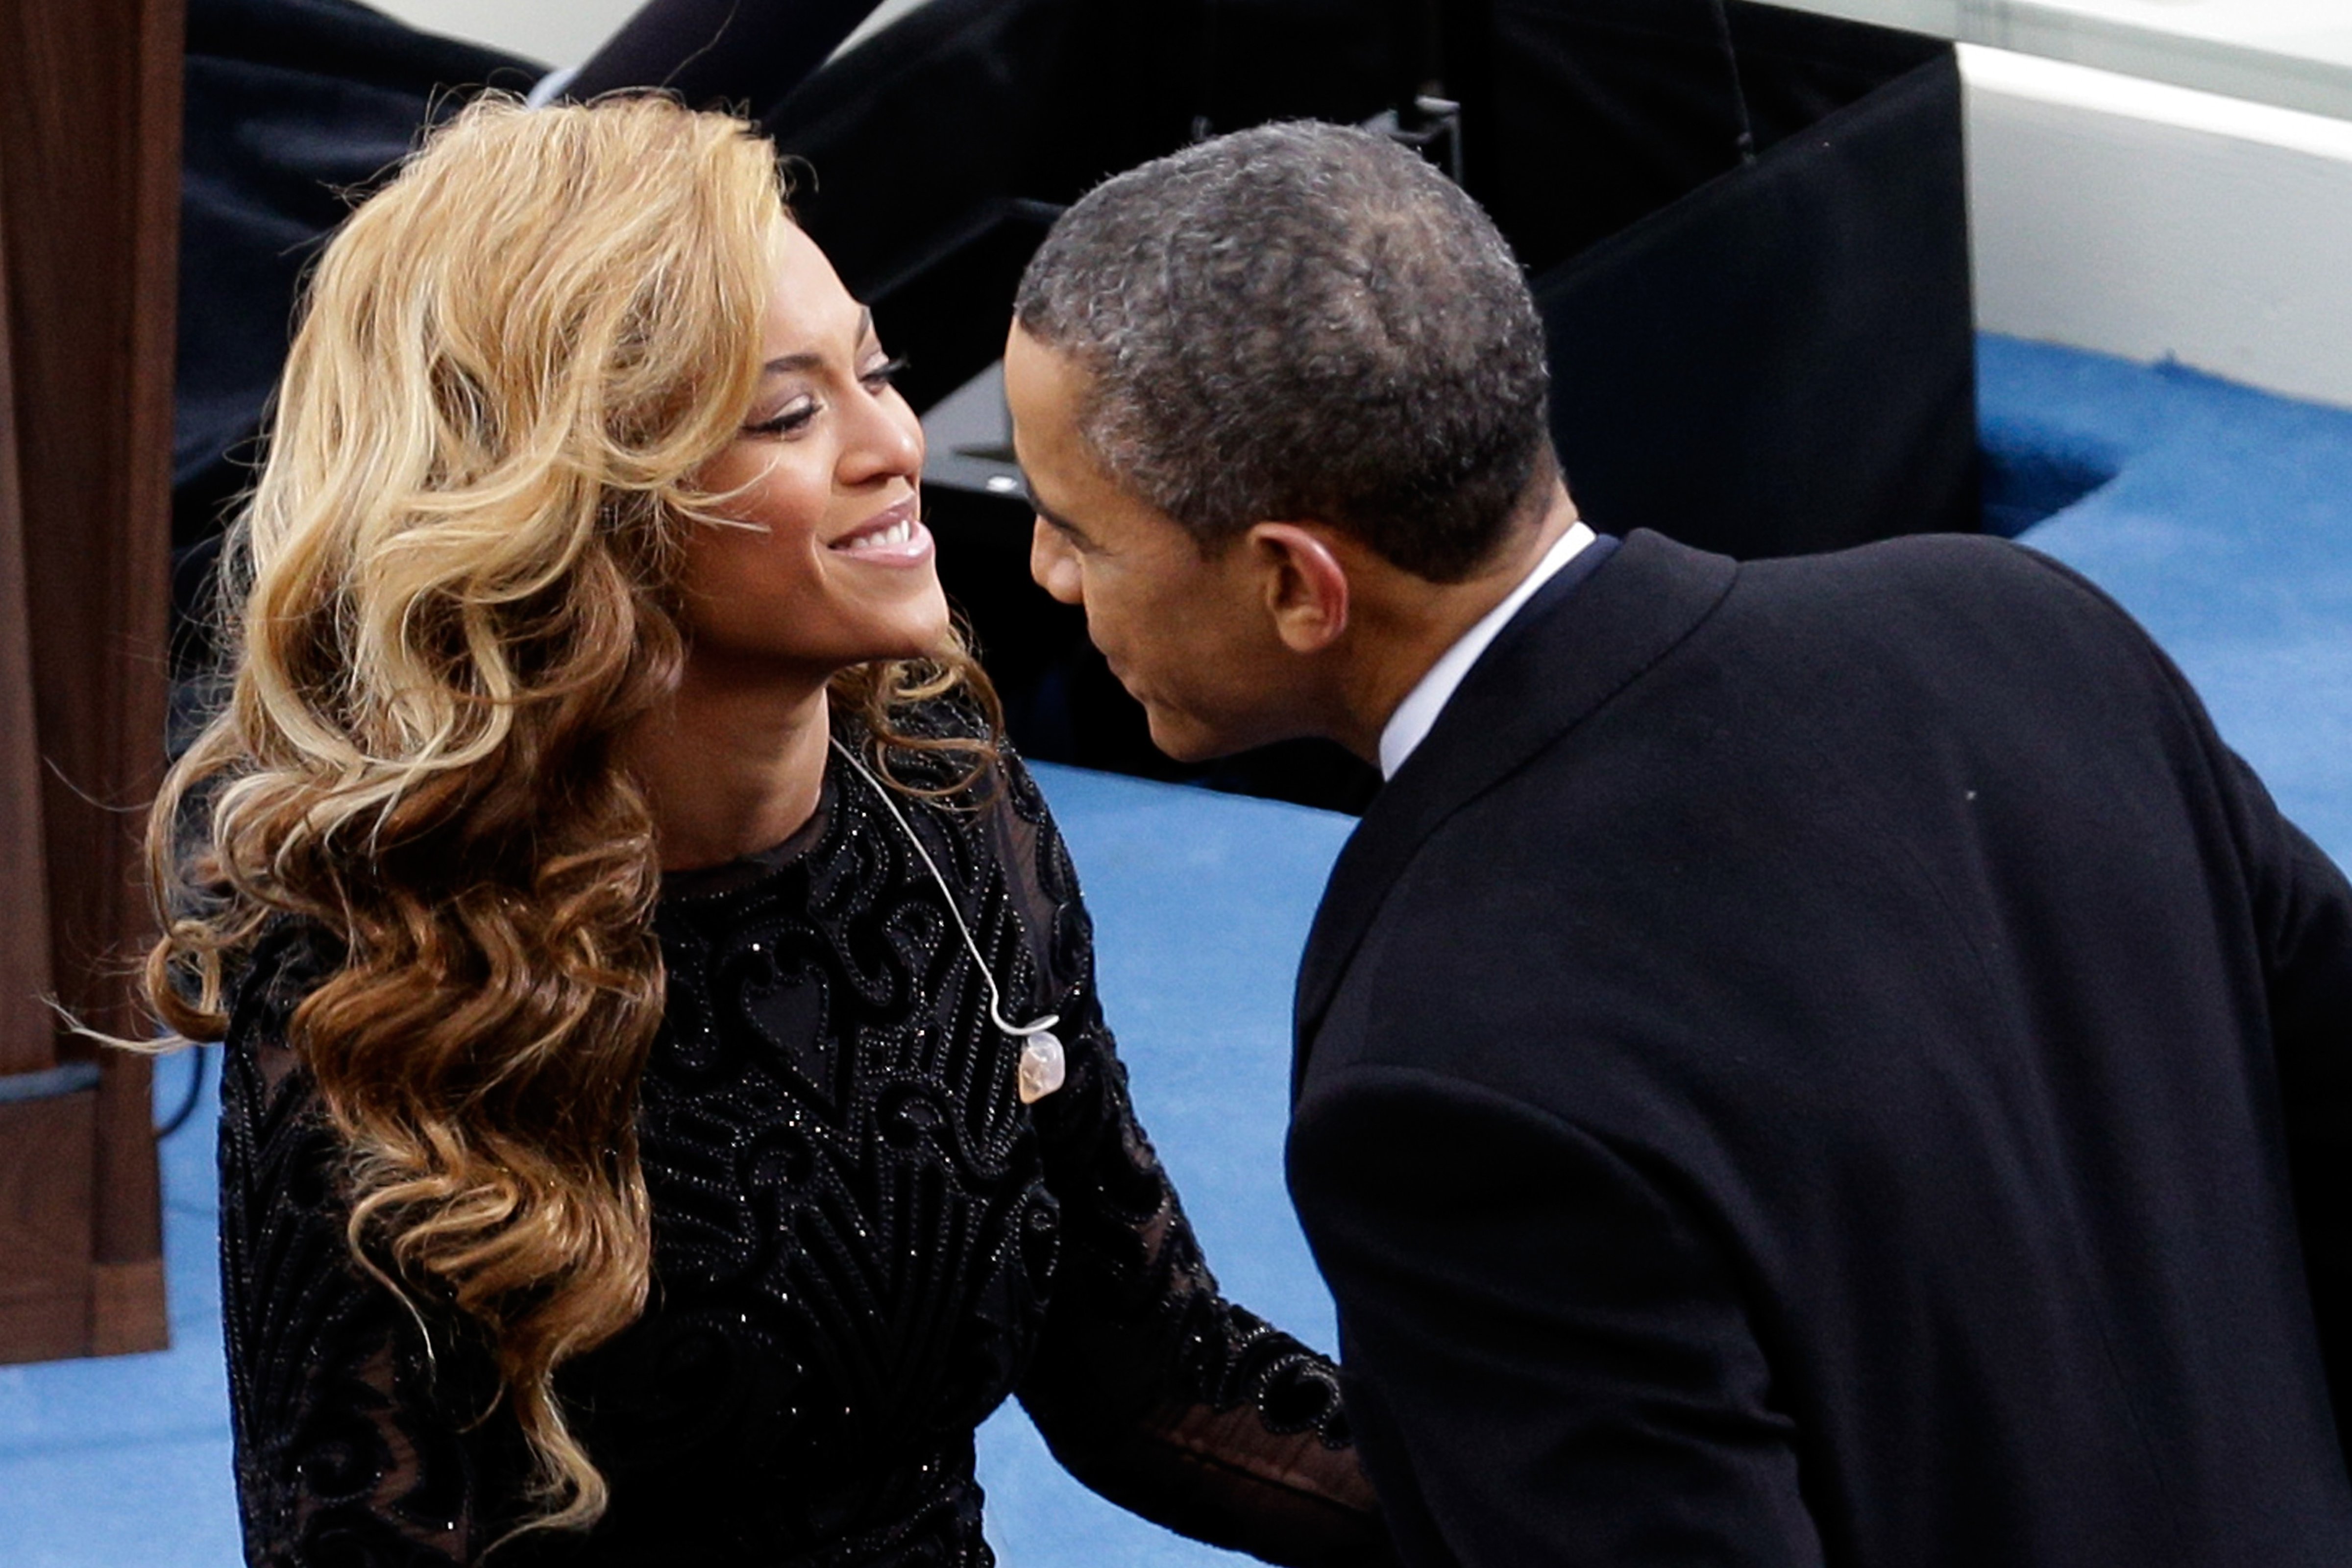 President Barack Obama and Beyonce at the Inauguration on January 21, 2013 in Washington, DC. (Rob Carr / Getty Images)